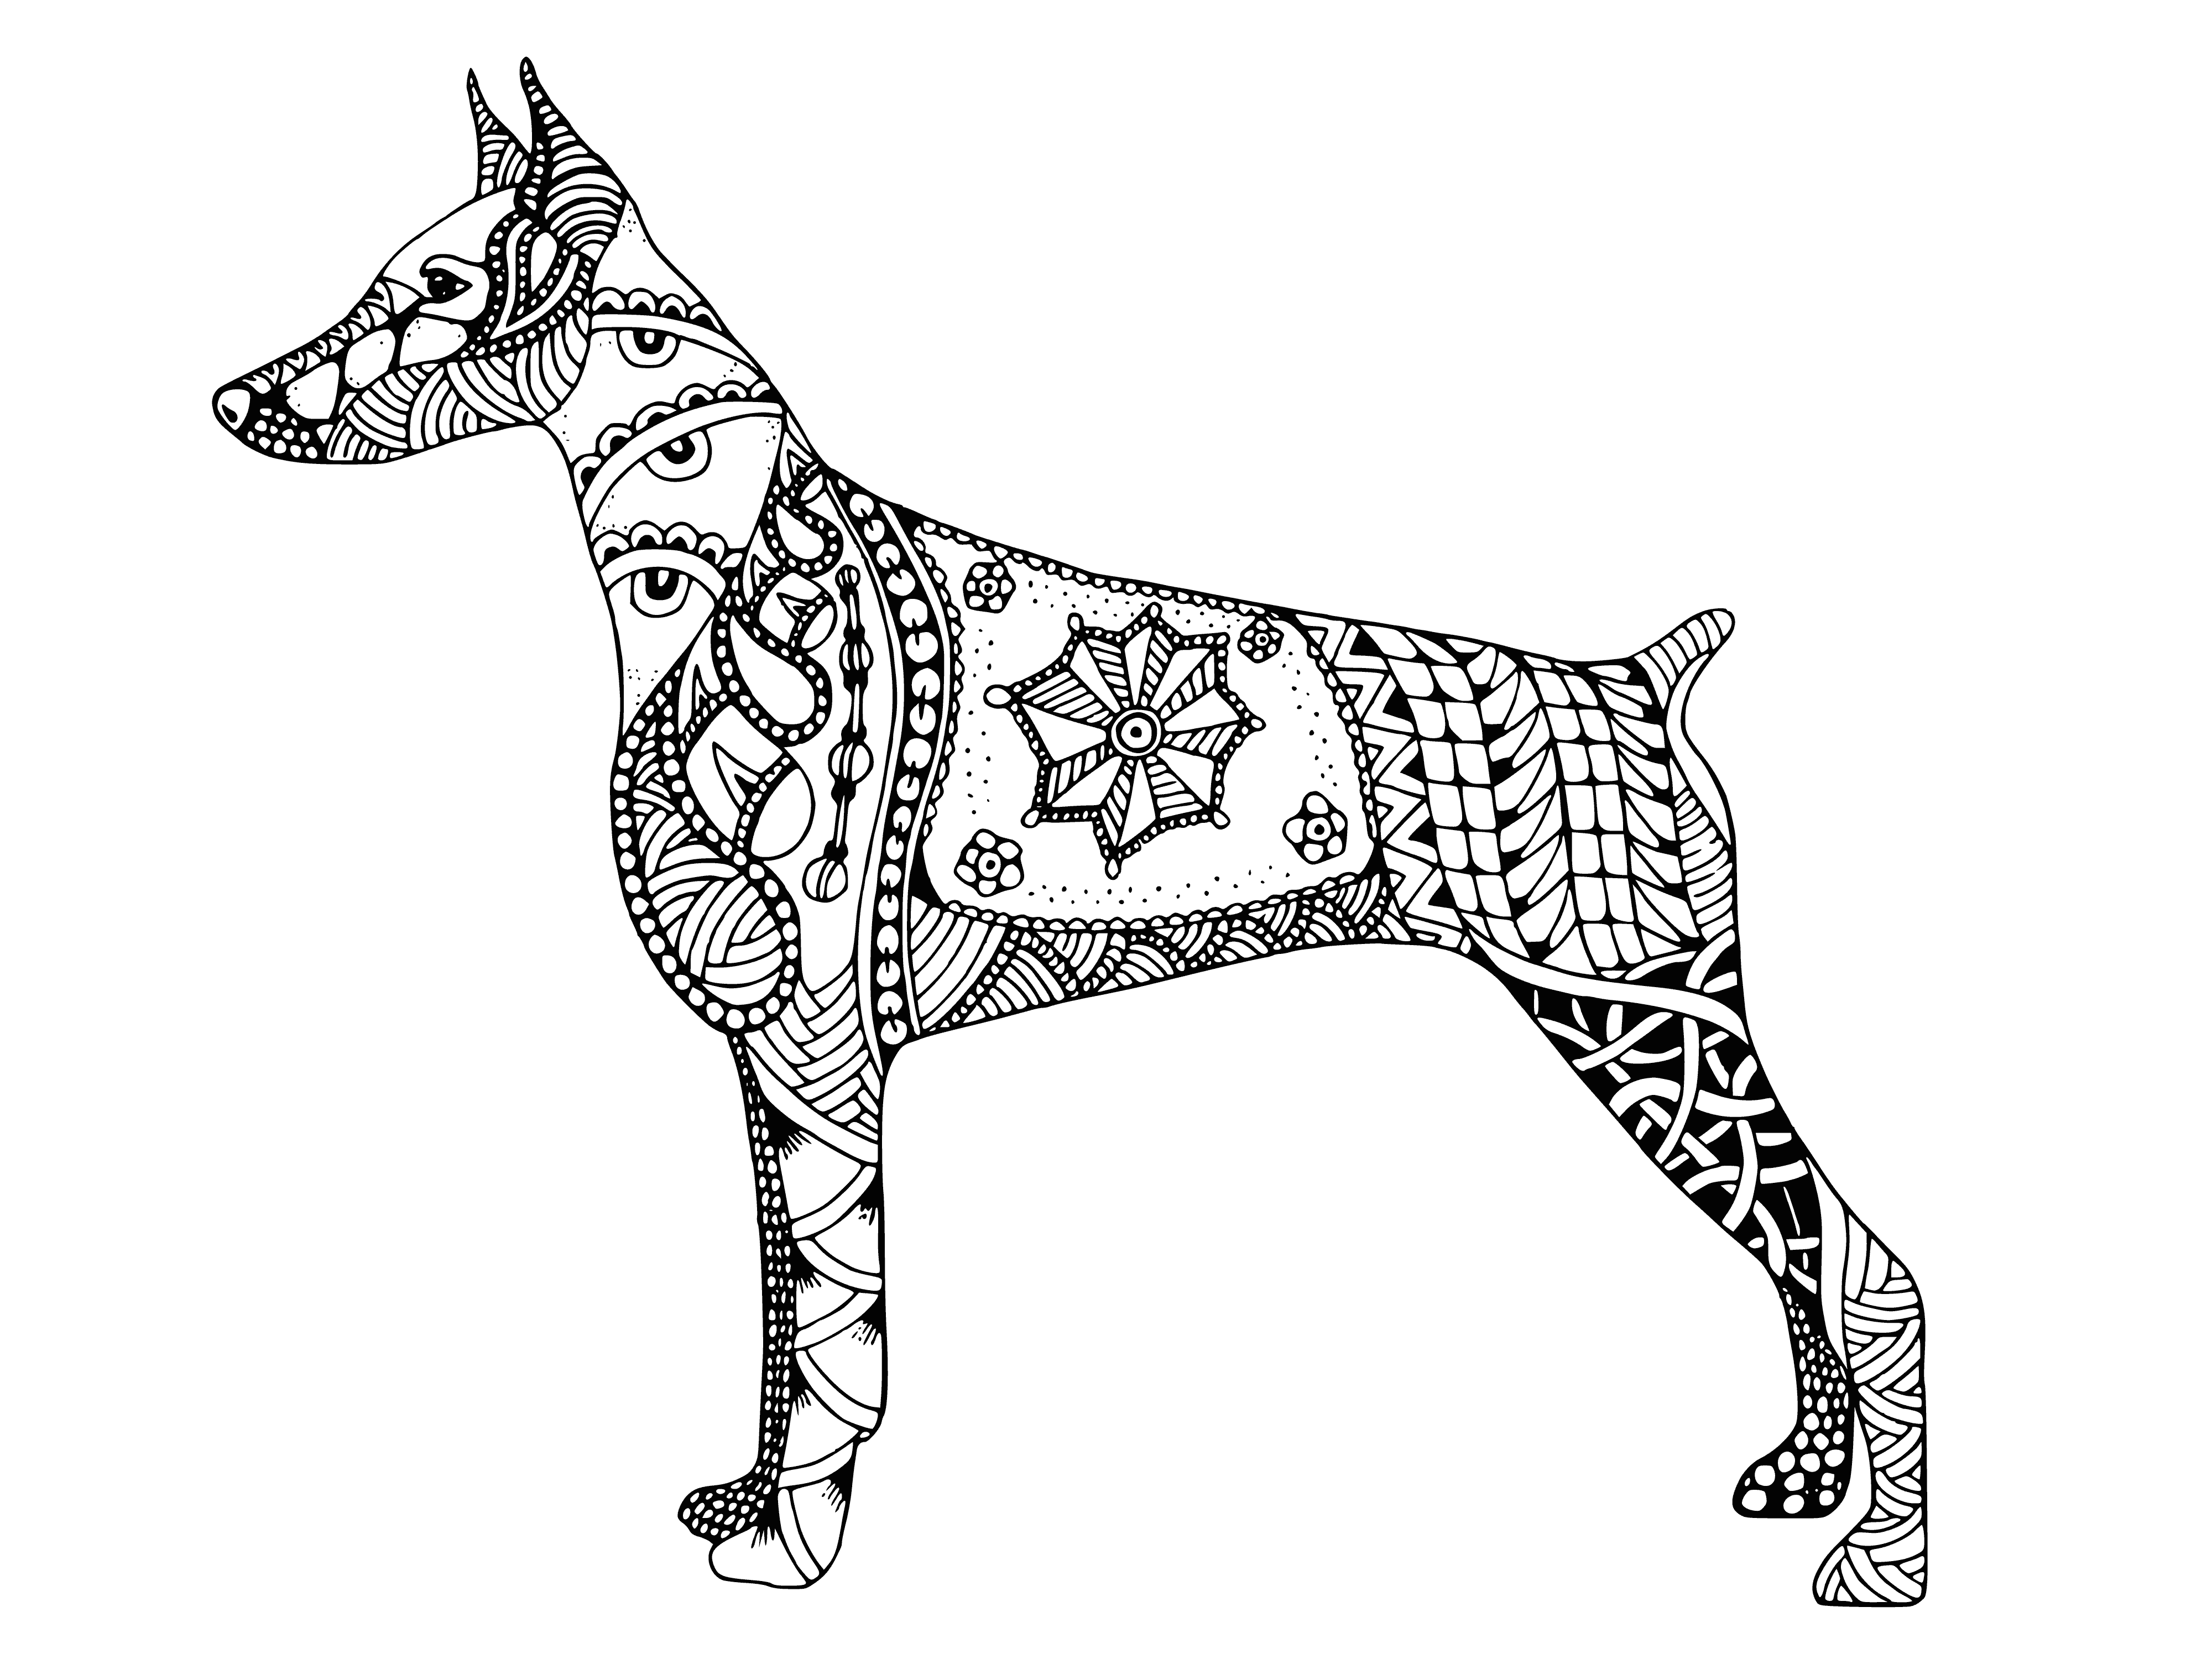 coloring page: The Doberman pinscher is a large, muscular and loyal dog with a sleek coat, typically in black and brown, but also red and blue.